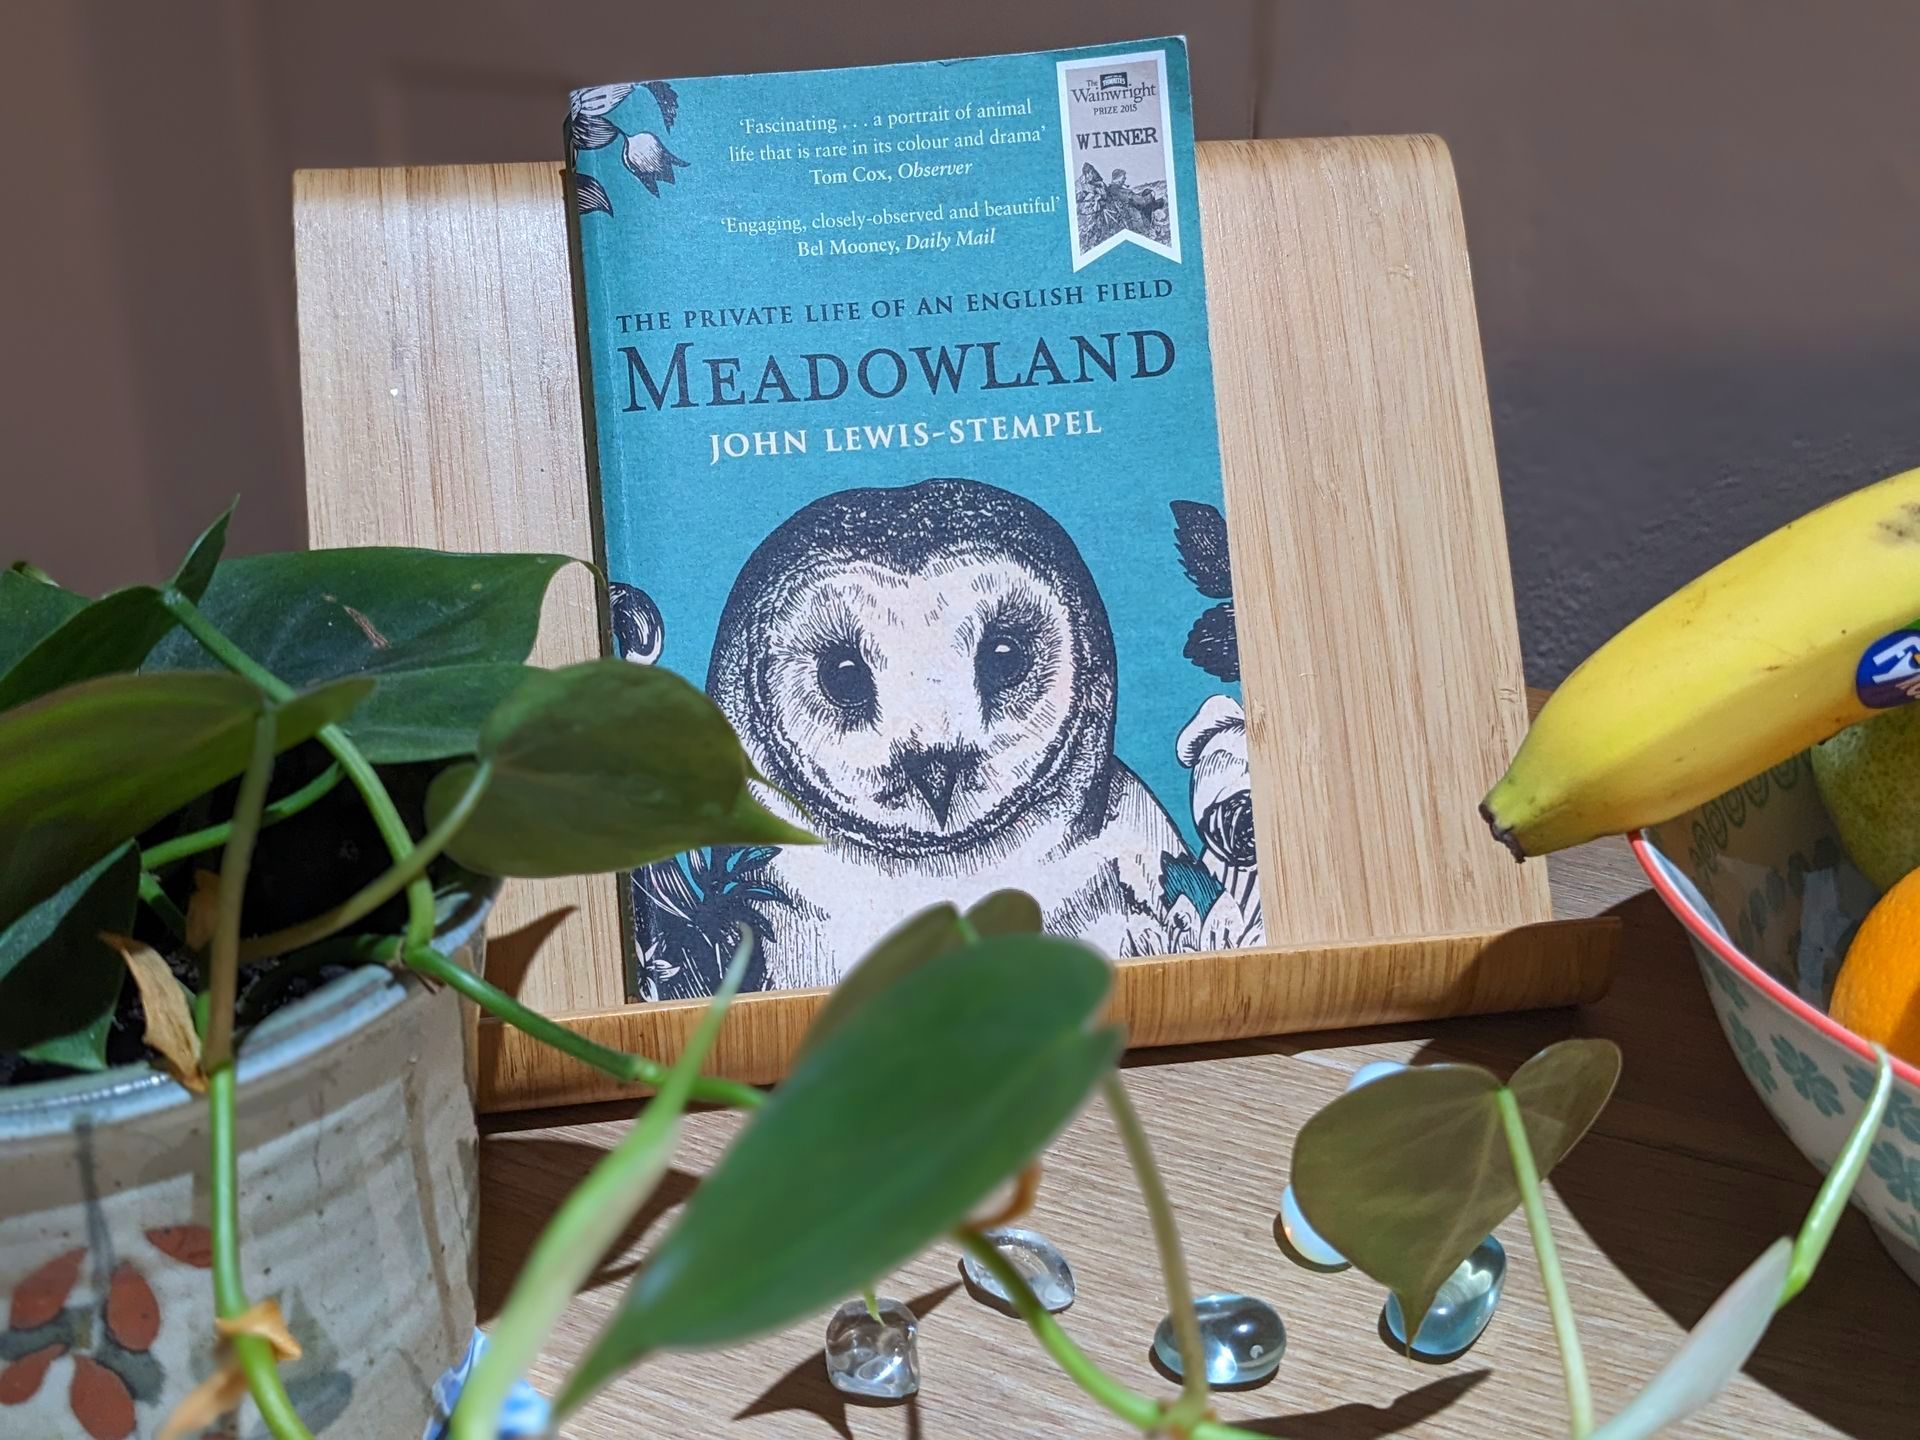 Meadowland by John Lewis-Stempel by Sue Cartwright, Spiral Leaf